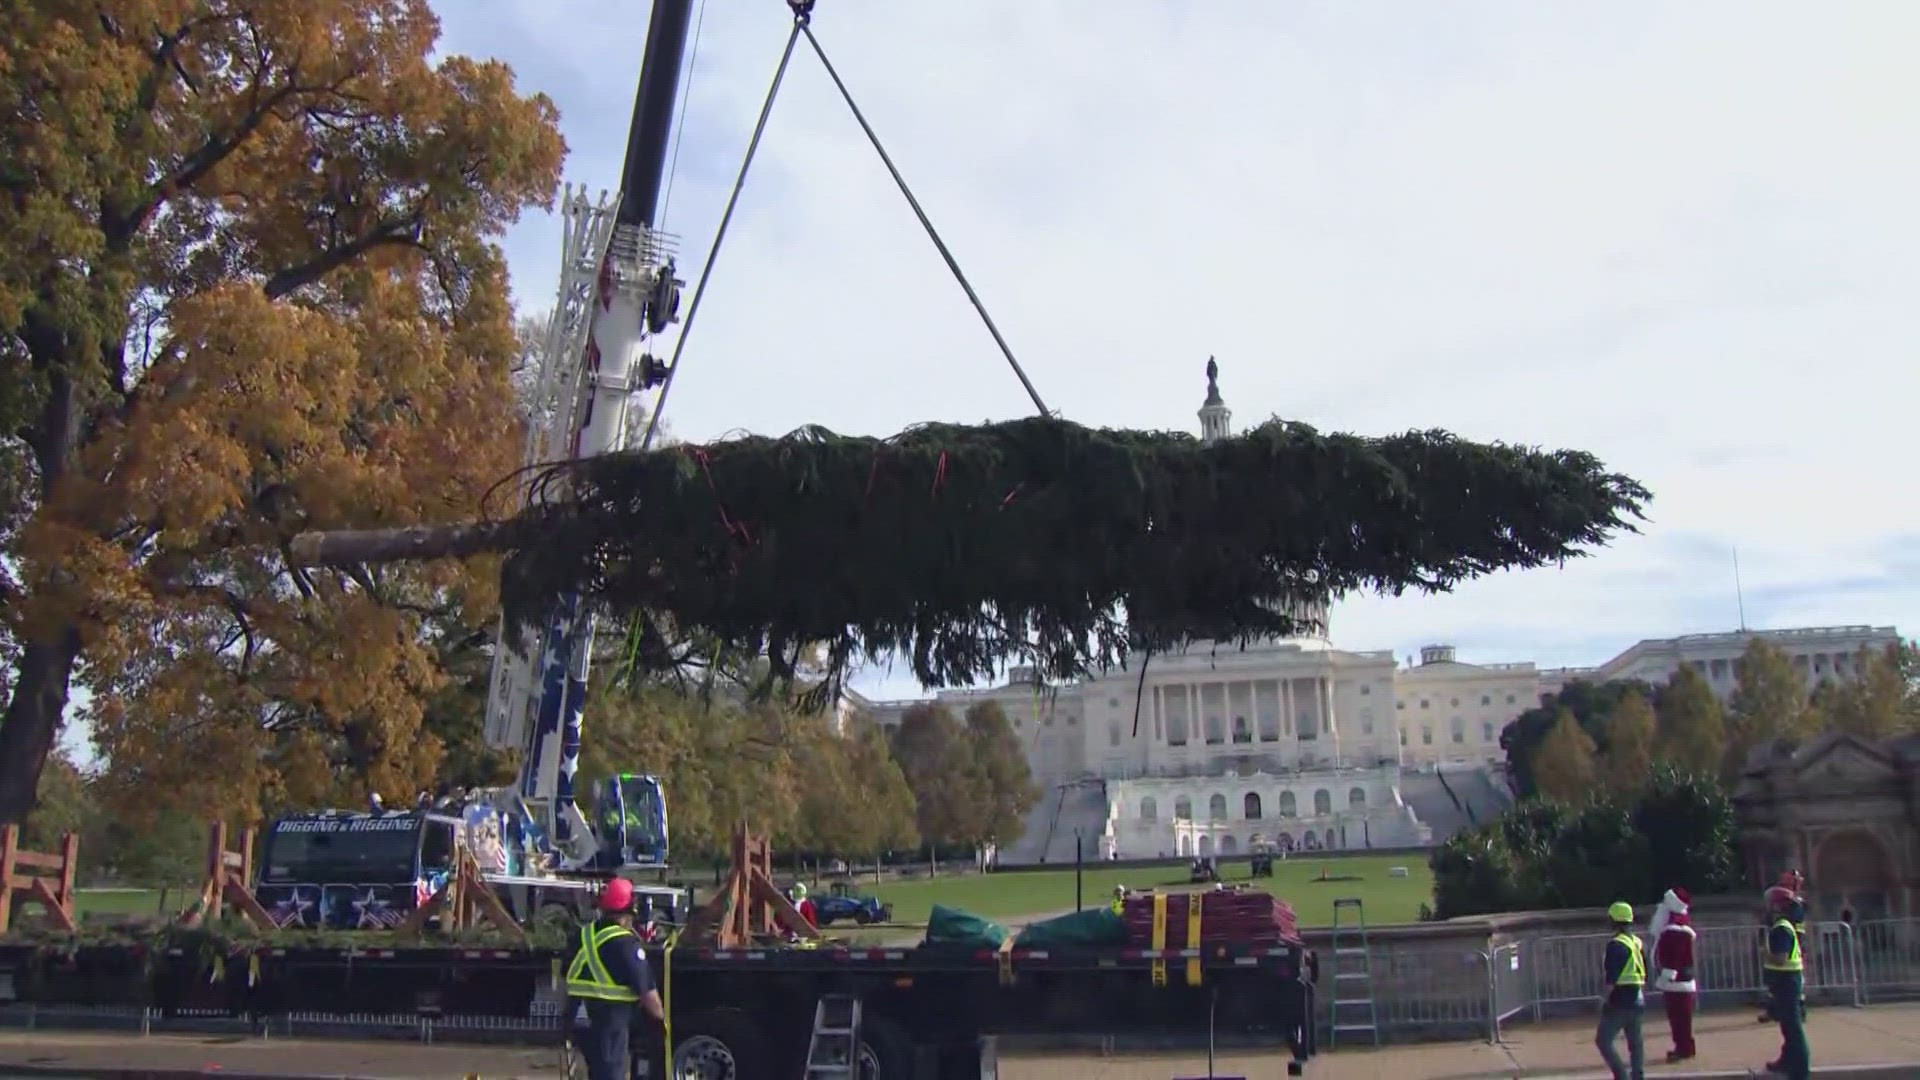 The tree was lifted from a flatbed truck and delivered to the West Lawn of the U.S. Capitol Building.